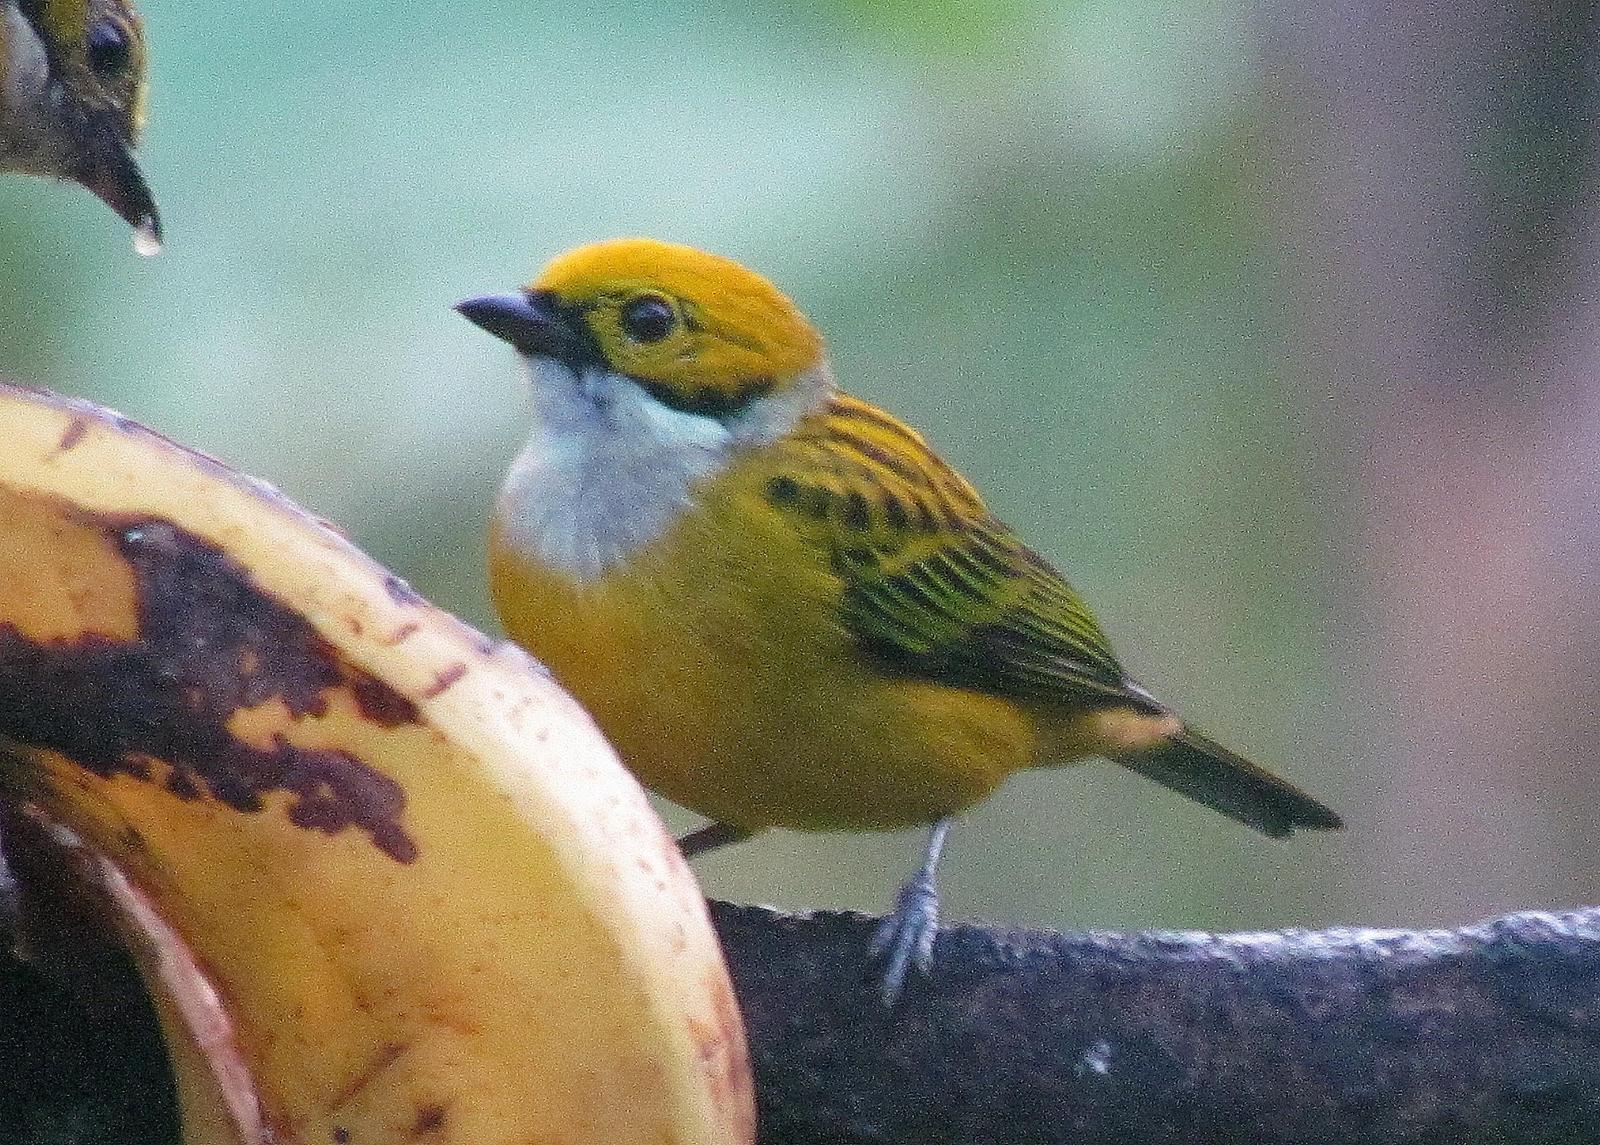 Silver-throated Tanager Photo by Jeff Harding